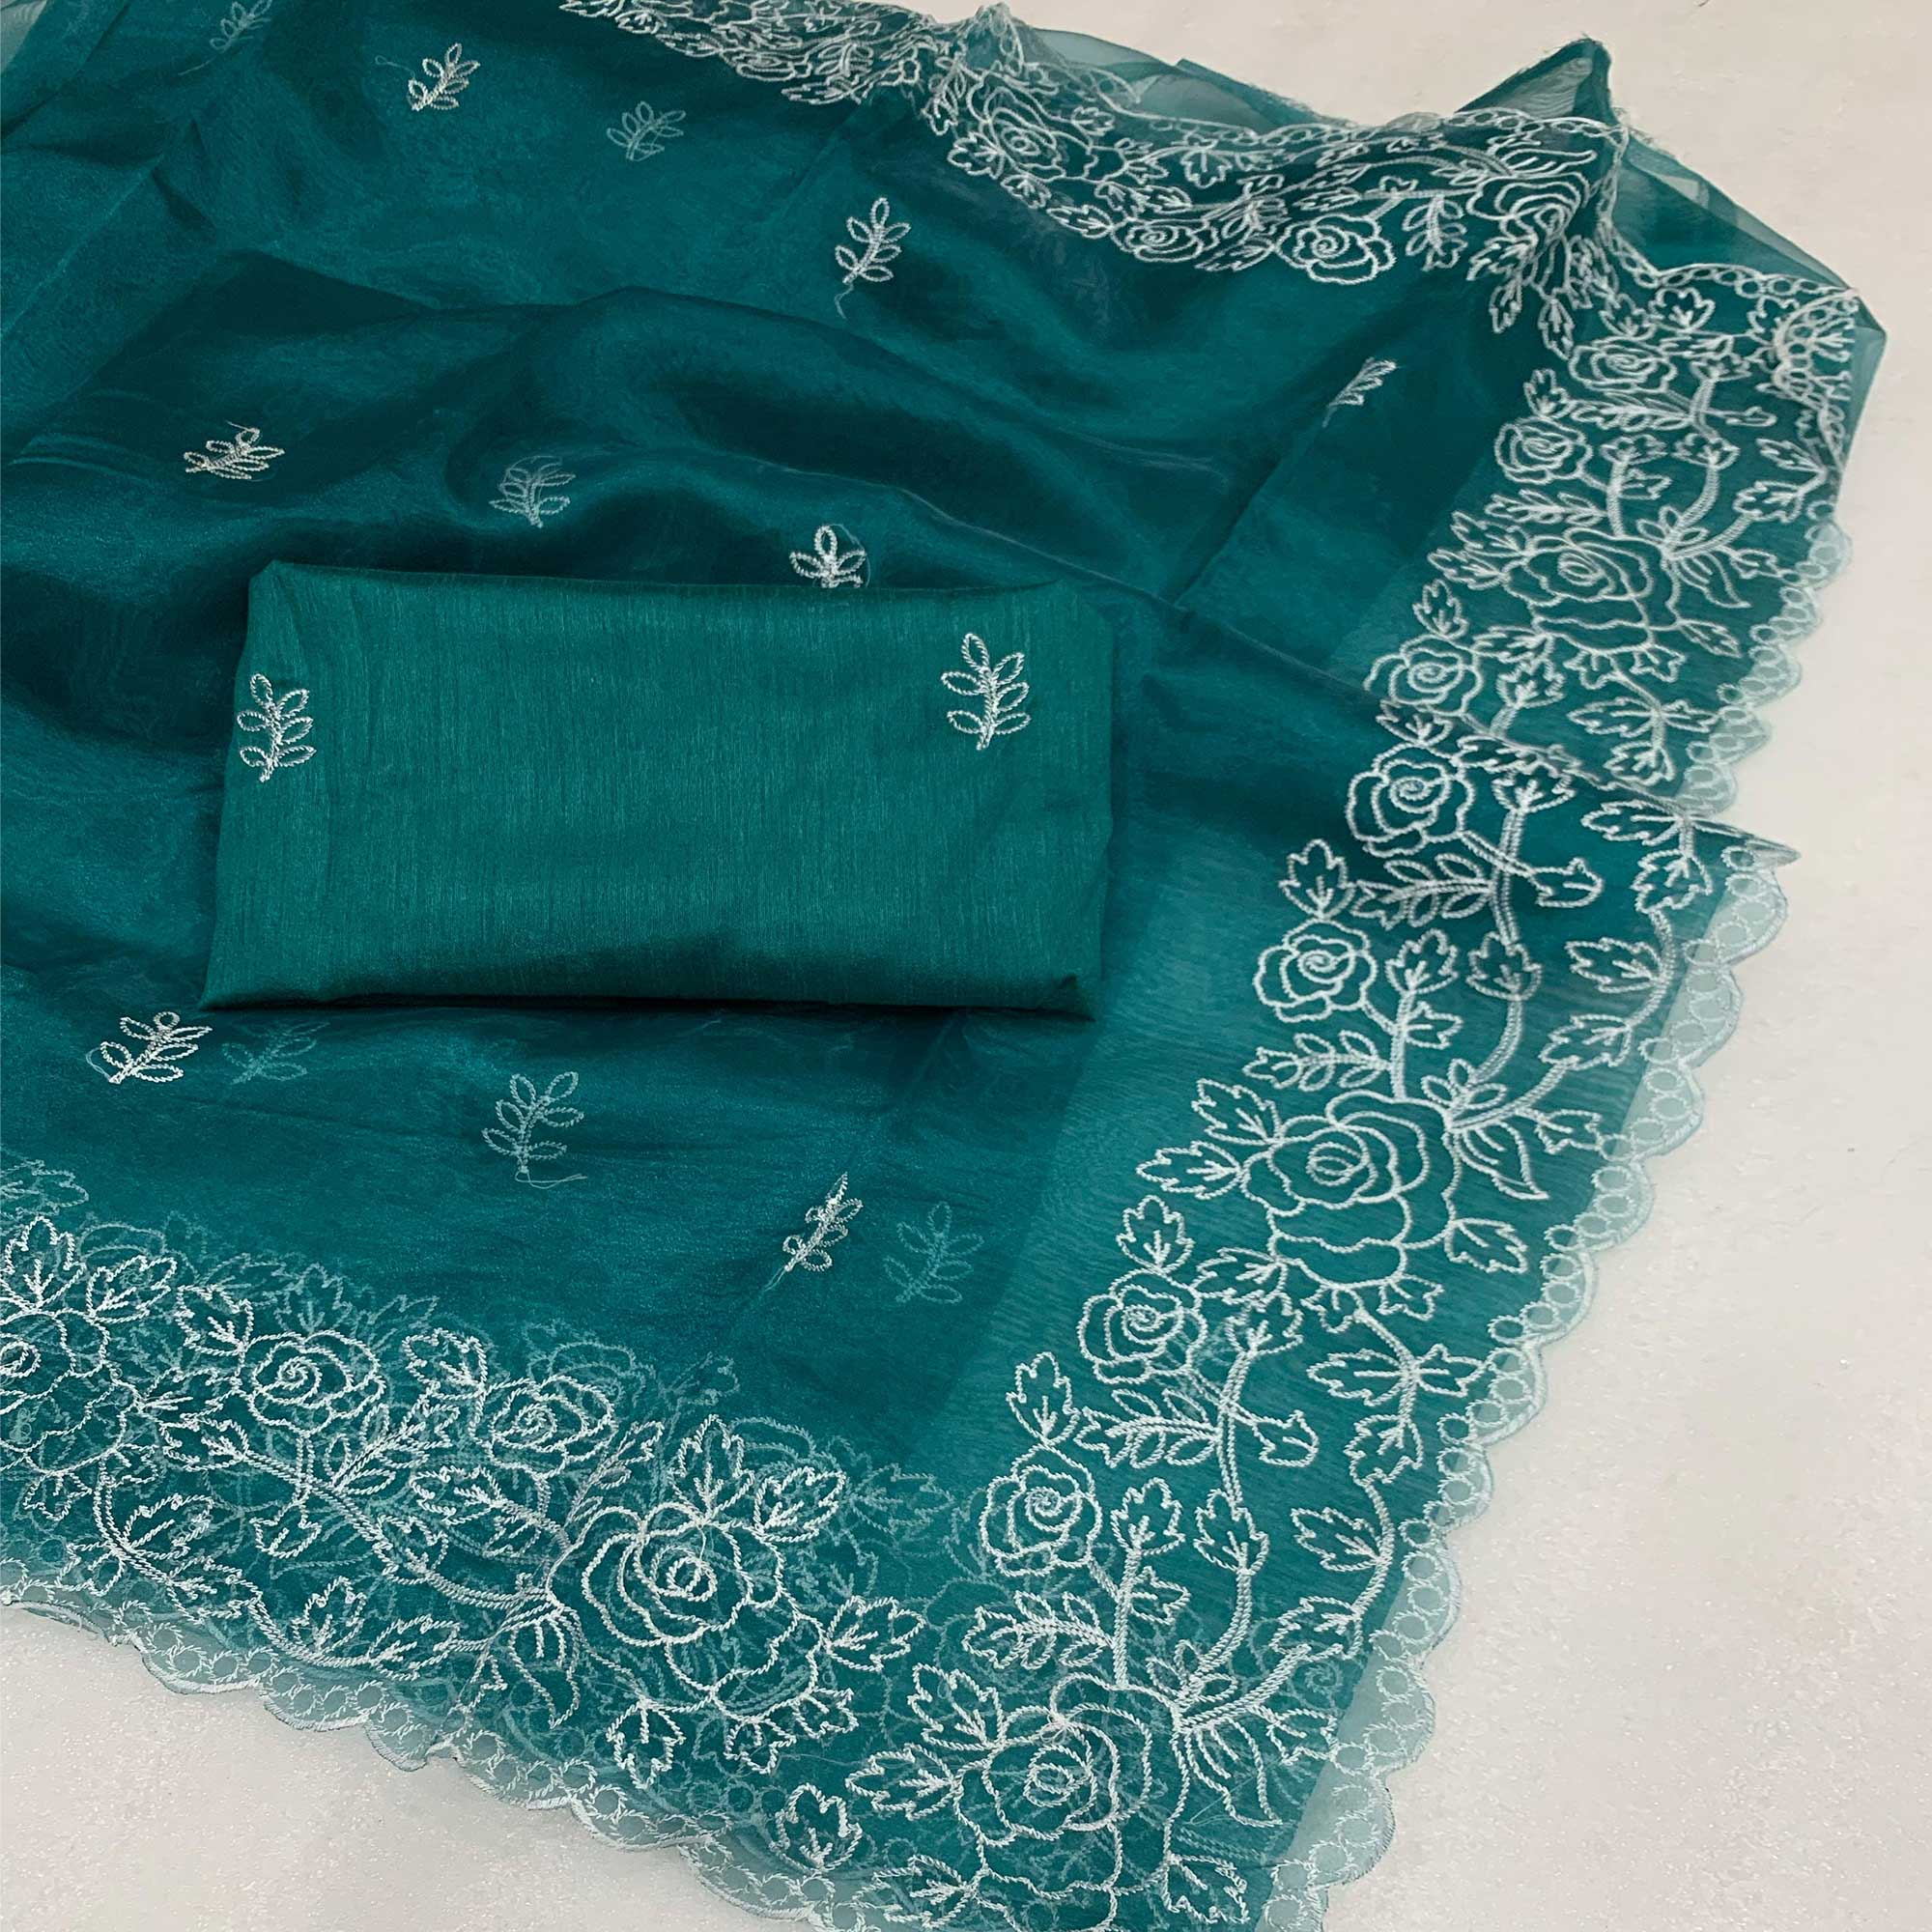 Teal Floral Embroidered Organza Saree